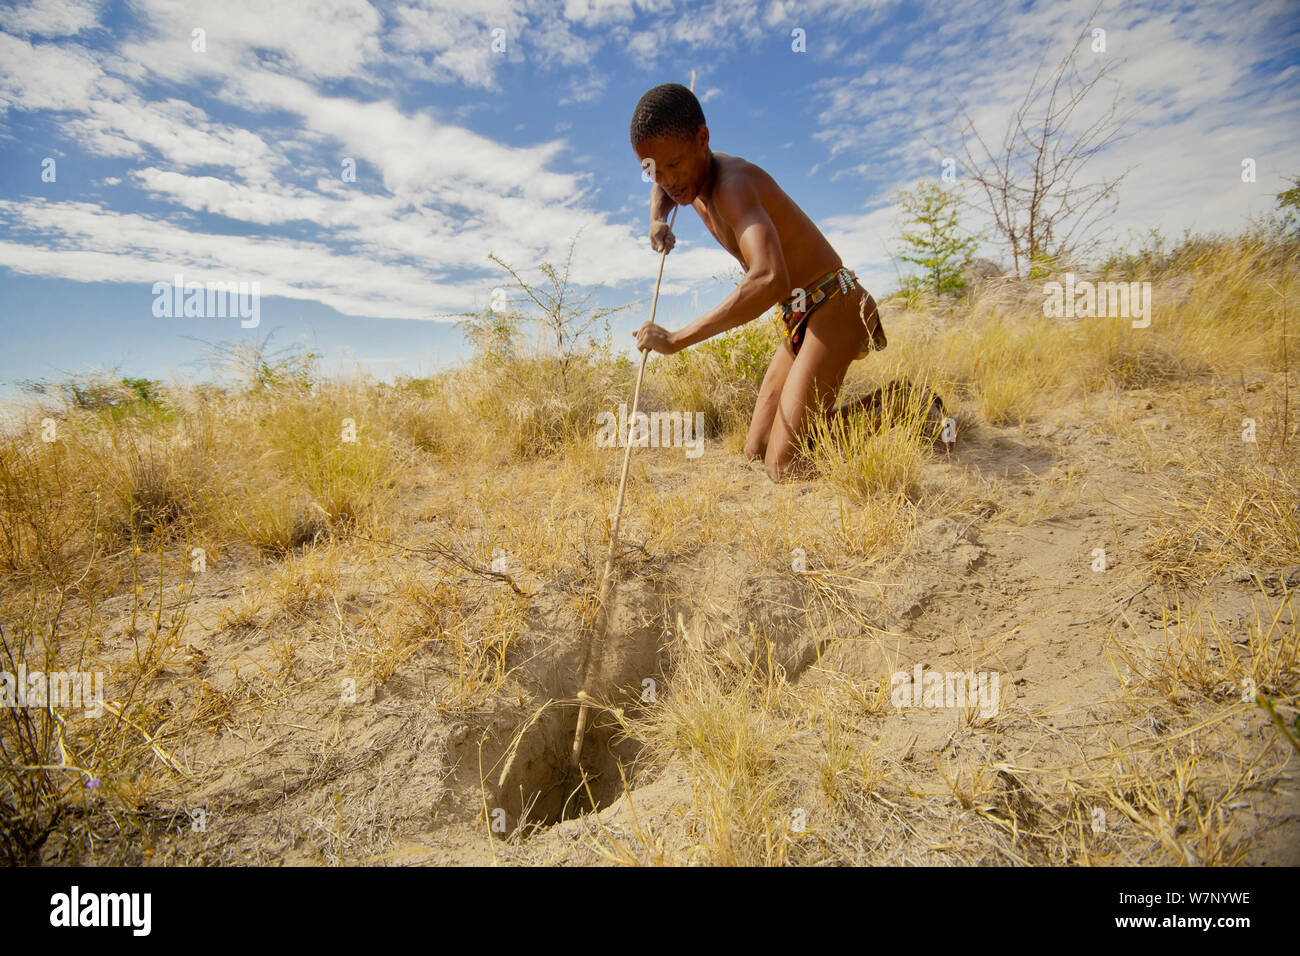 A young Zu/'hoasi Bushman hunter uses a long pole with a hook on the end to catch Spring Hares (Pedetes capensis) in a burrow in the Kalahari, Botswana. April 2012. Stock Photo